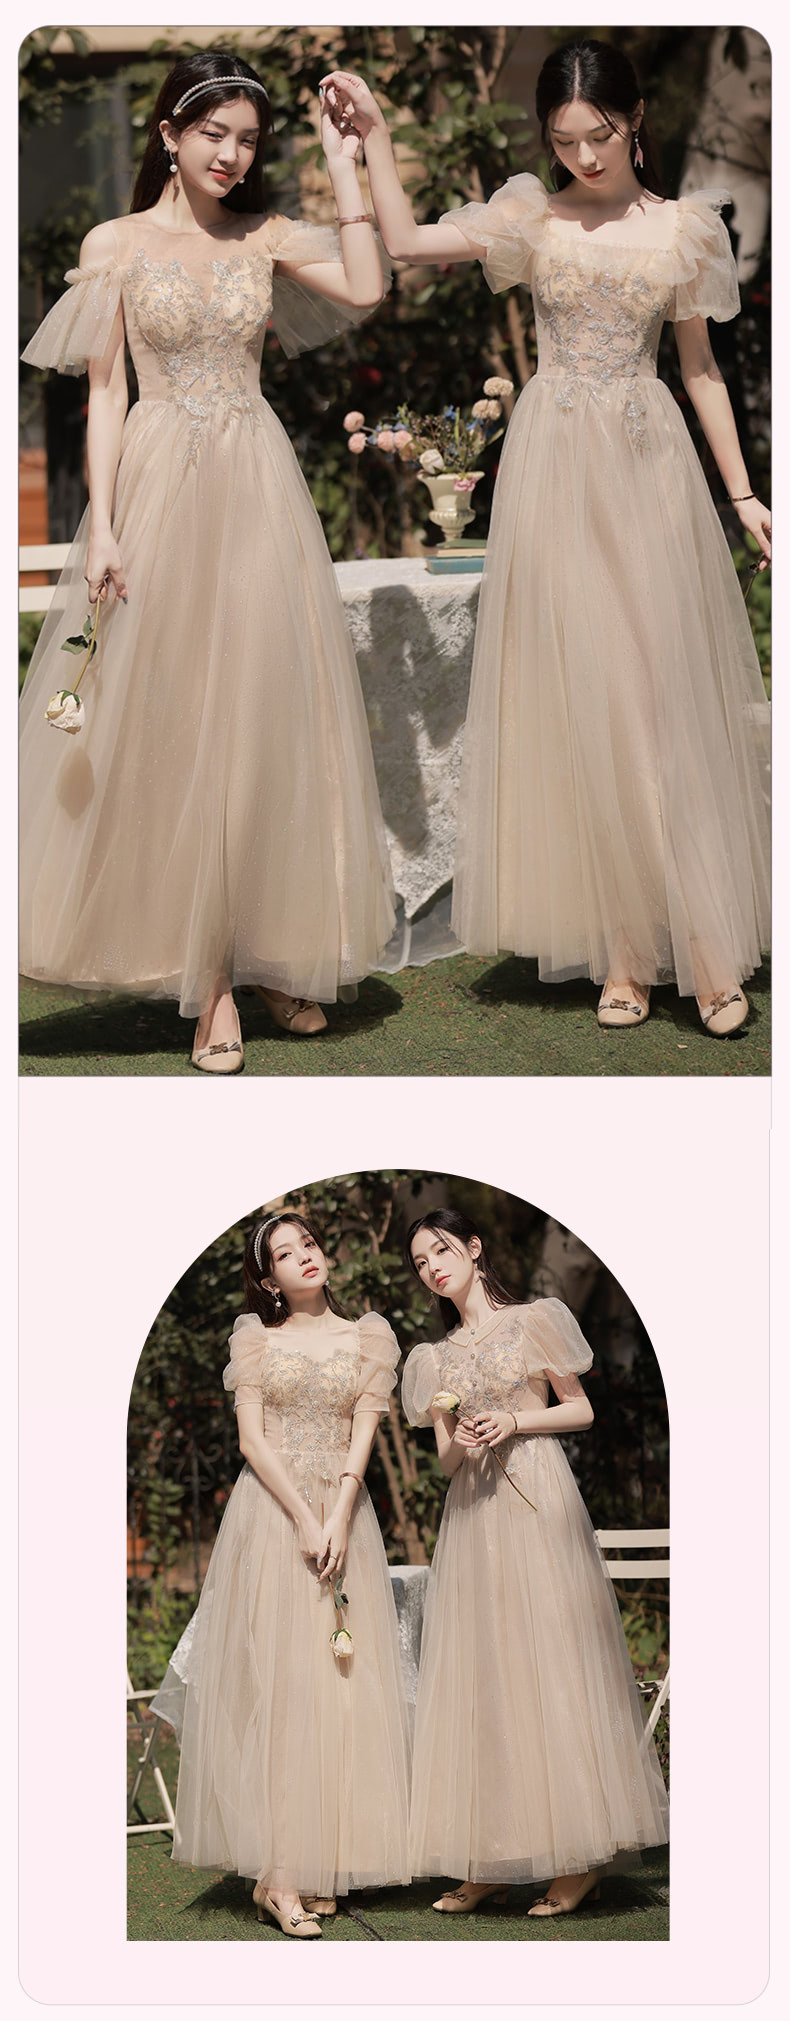 Formal-Apricot-Bridesmaid-Dress-Evening-Gown-for-Wedding-Party13.jpg